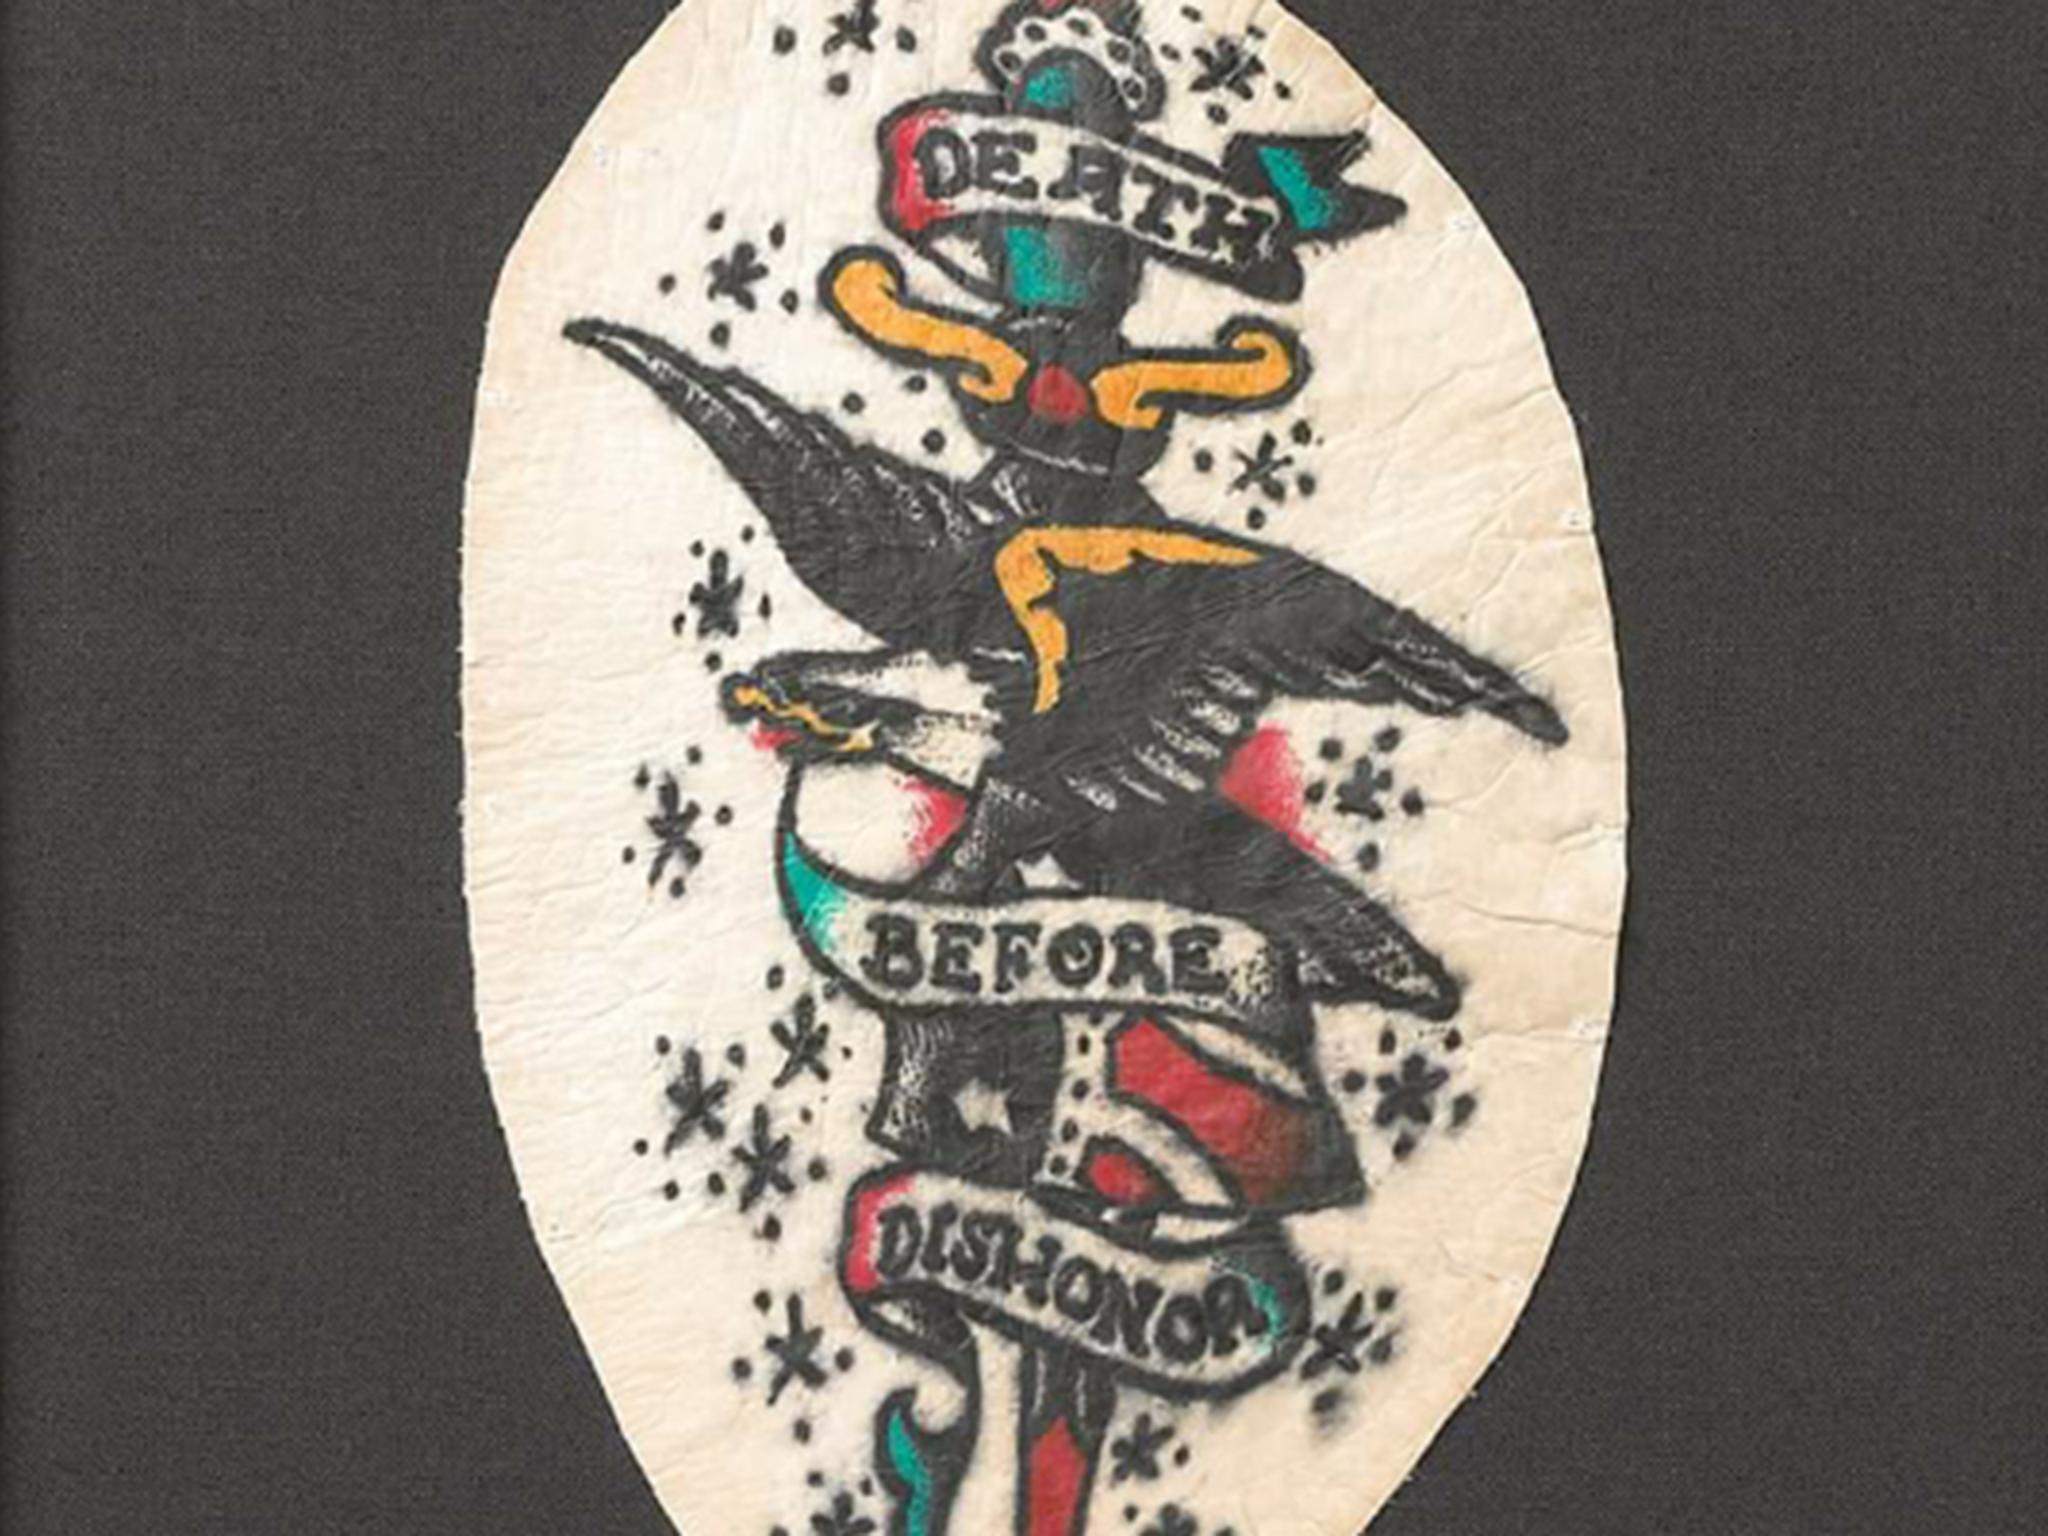 An example of a tattoo saved from a deceased person